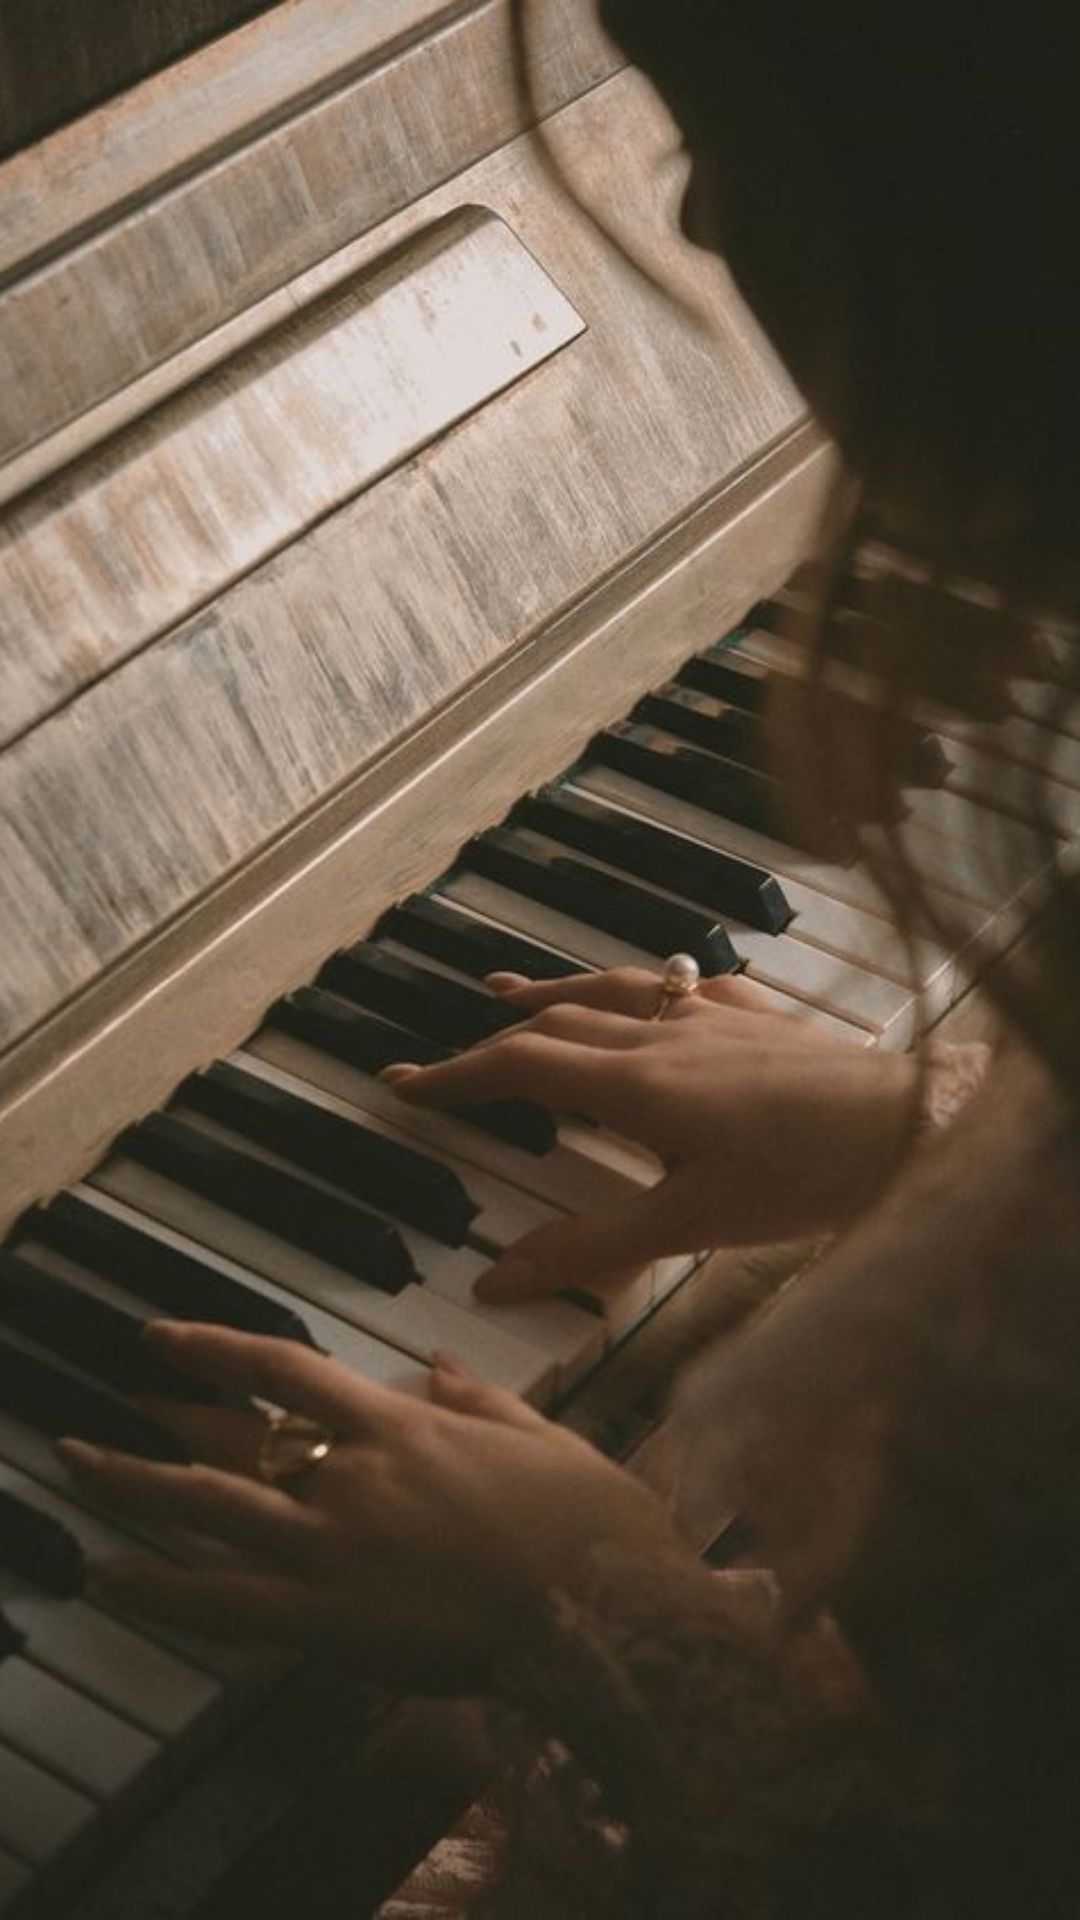 A person playing the piano - Music, piano